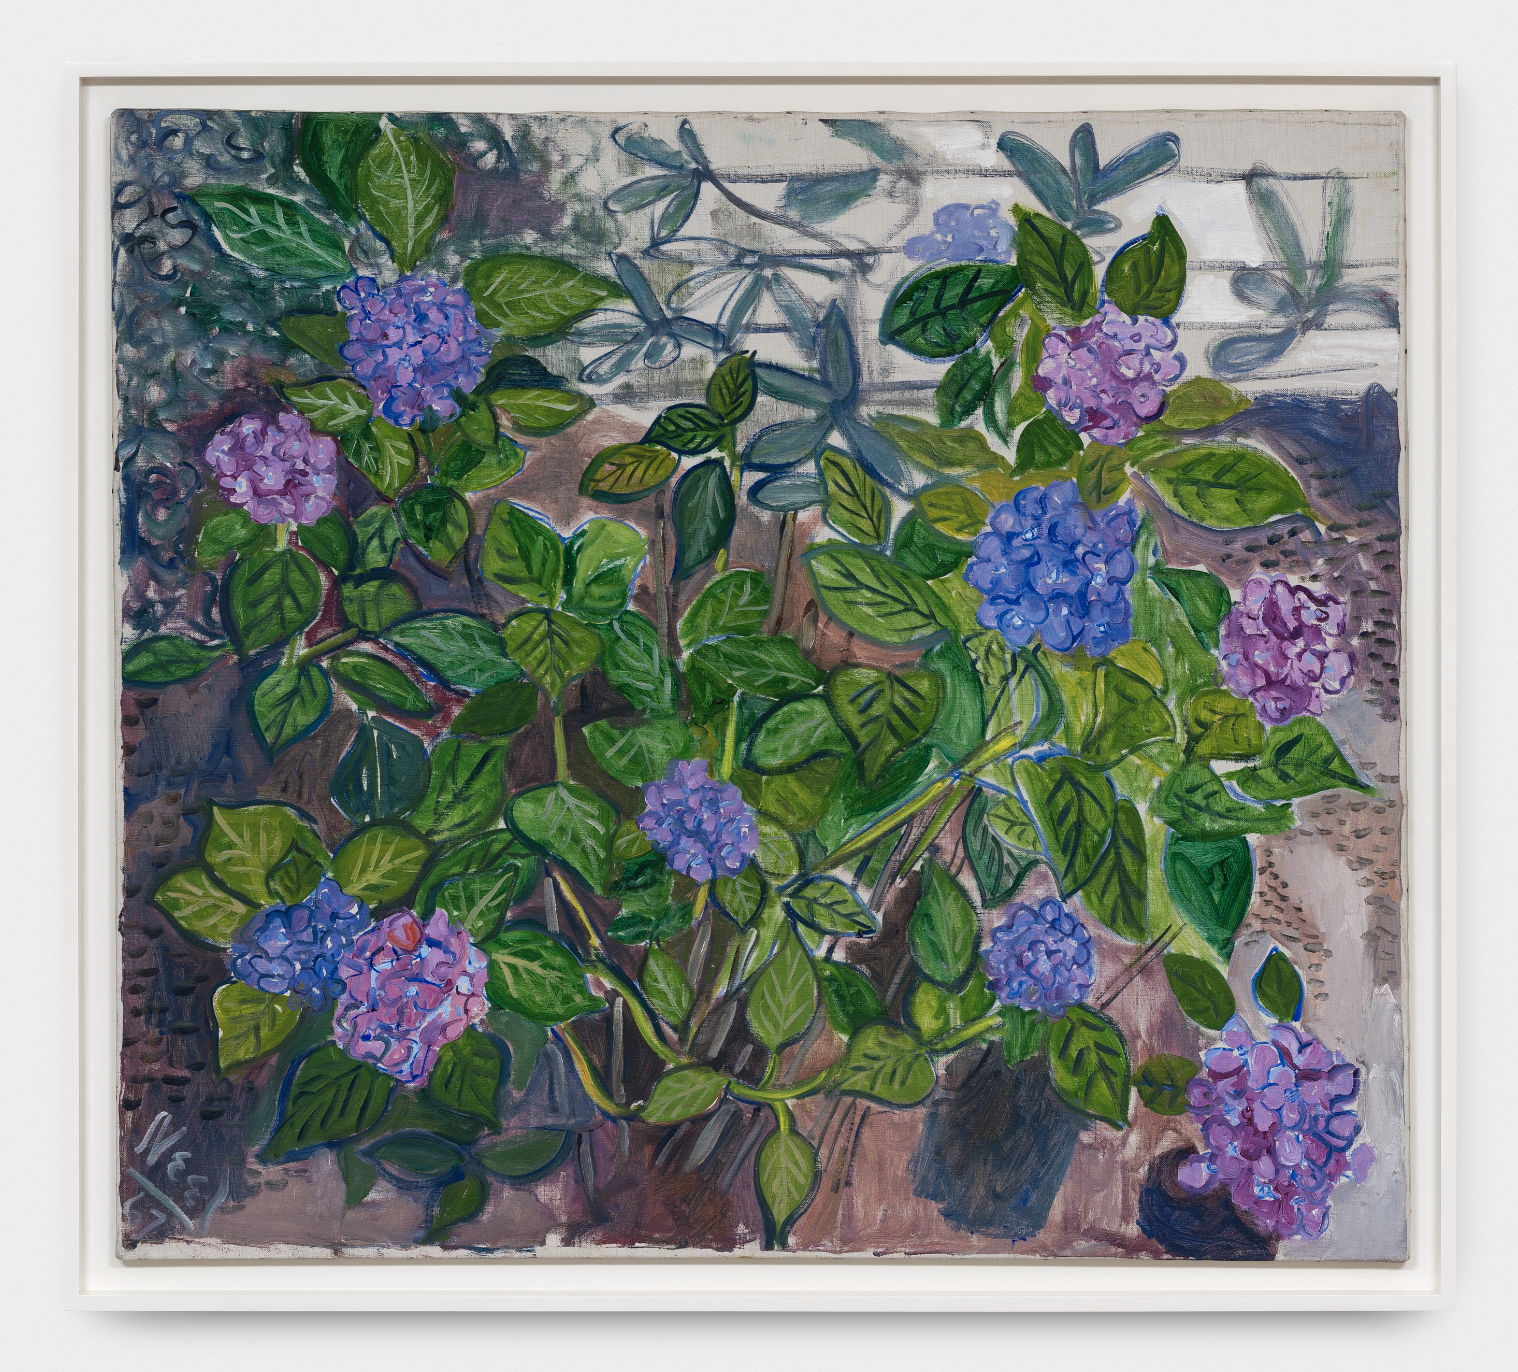 Alice Neel (1900-1984) Hydrangeas, 1967. Oil on canvas. 101,6 x 114,3 cm. Photo-credit: HV-studio, Brussels Courtesy: the Estate of Alice Neel and Xavier Hufkens, Brussels